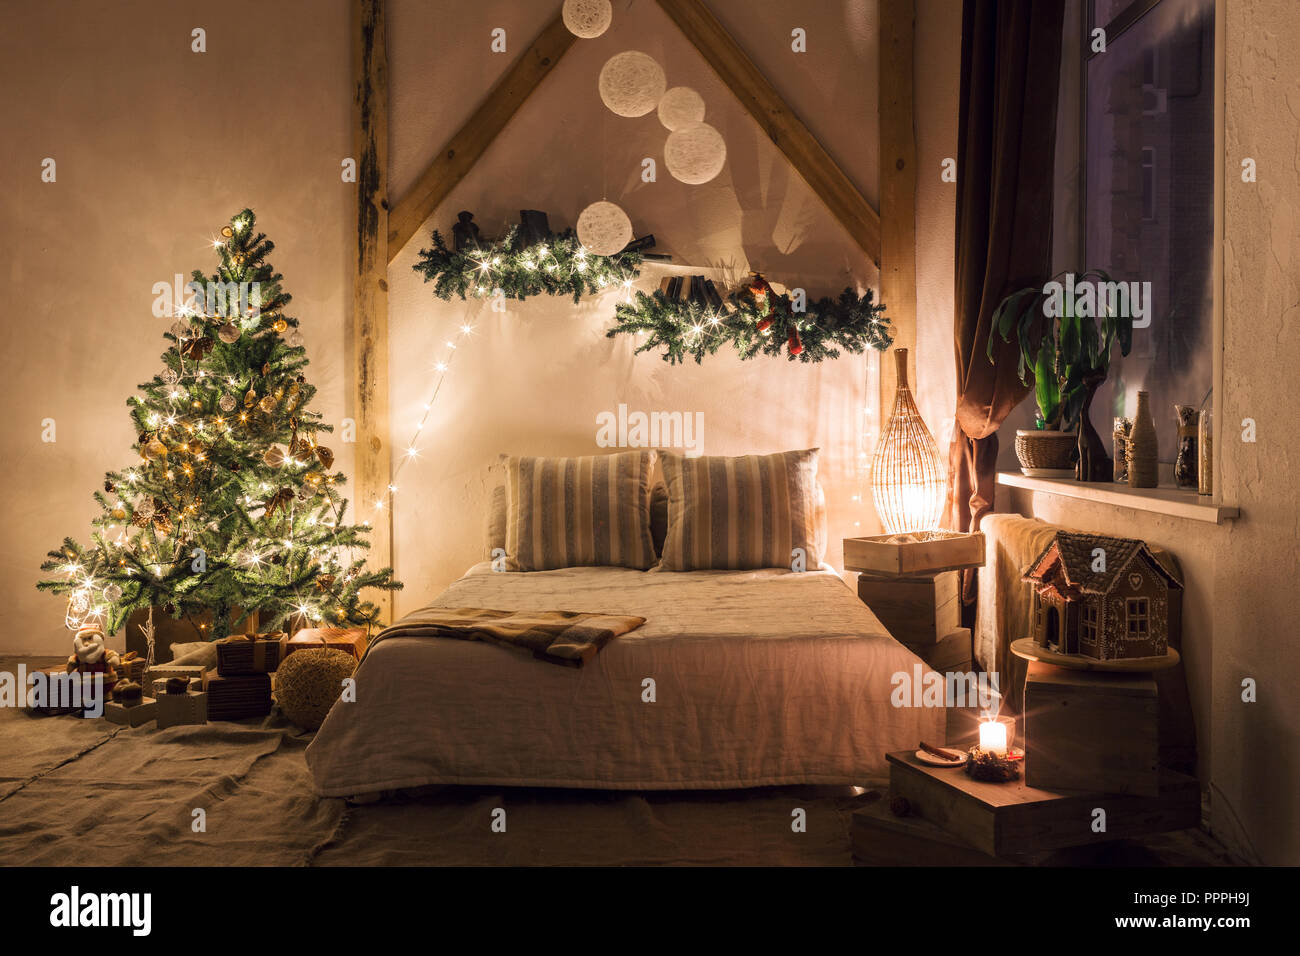 https://c8.alamy.com/comp/PPPH9J/warm-and-cozy-evening-in-living-room-sofa-bed-in-christmas-interior-concept-the-new-year-and-holidays-PPPH9J.jpg